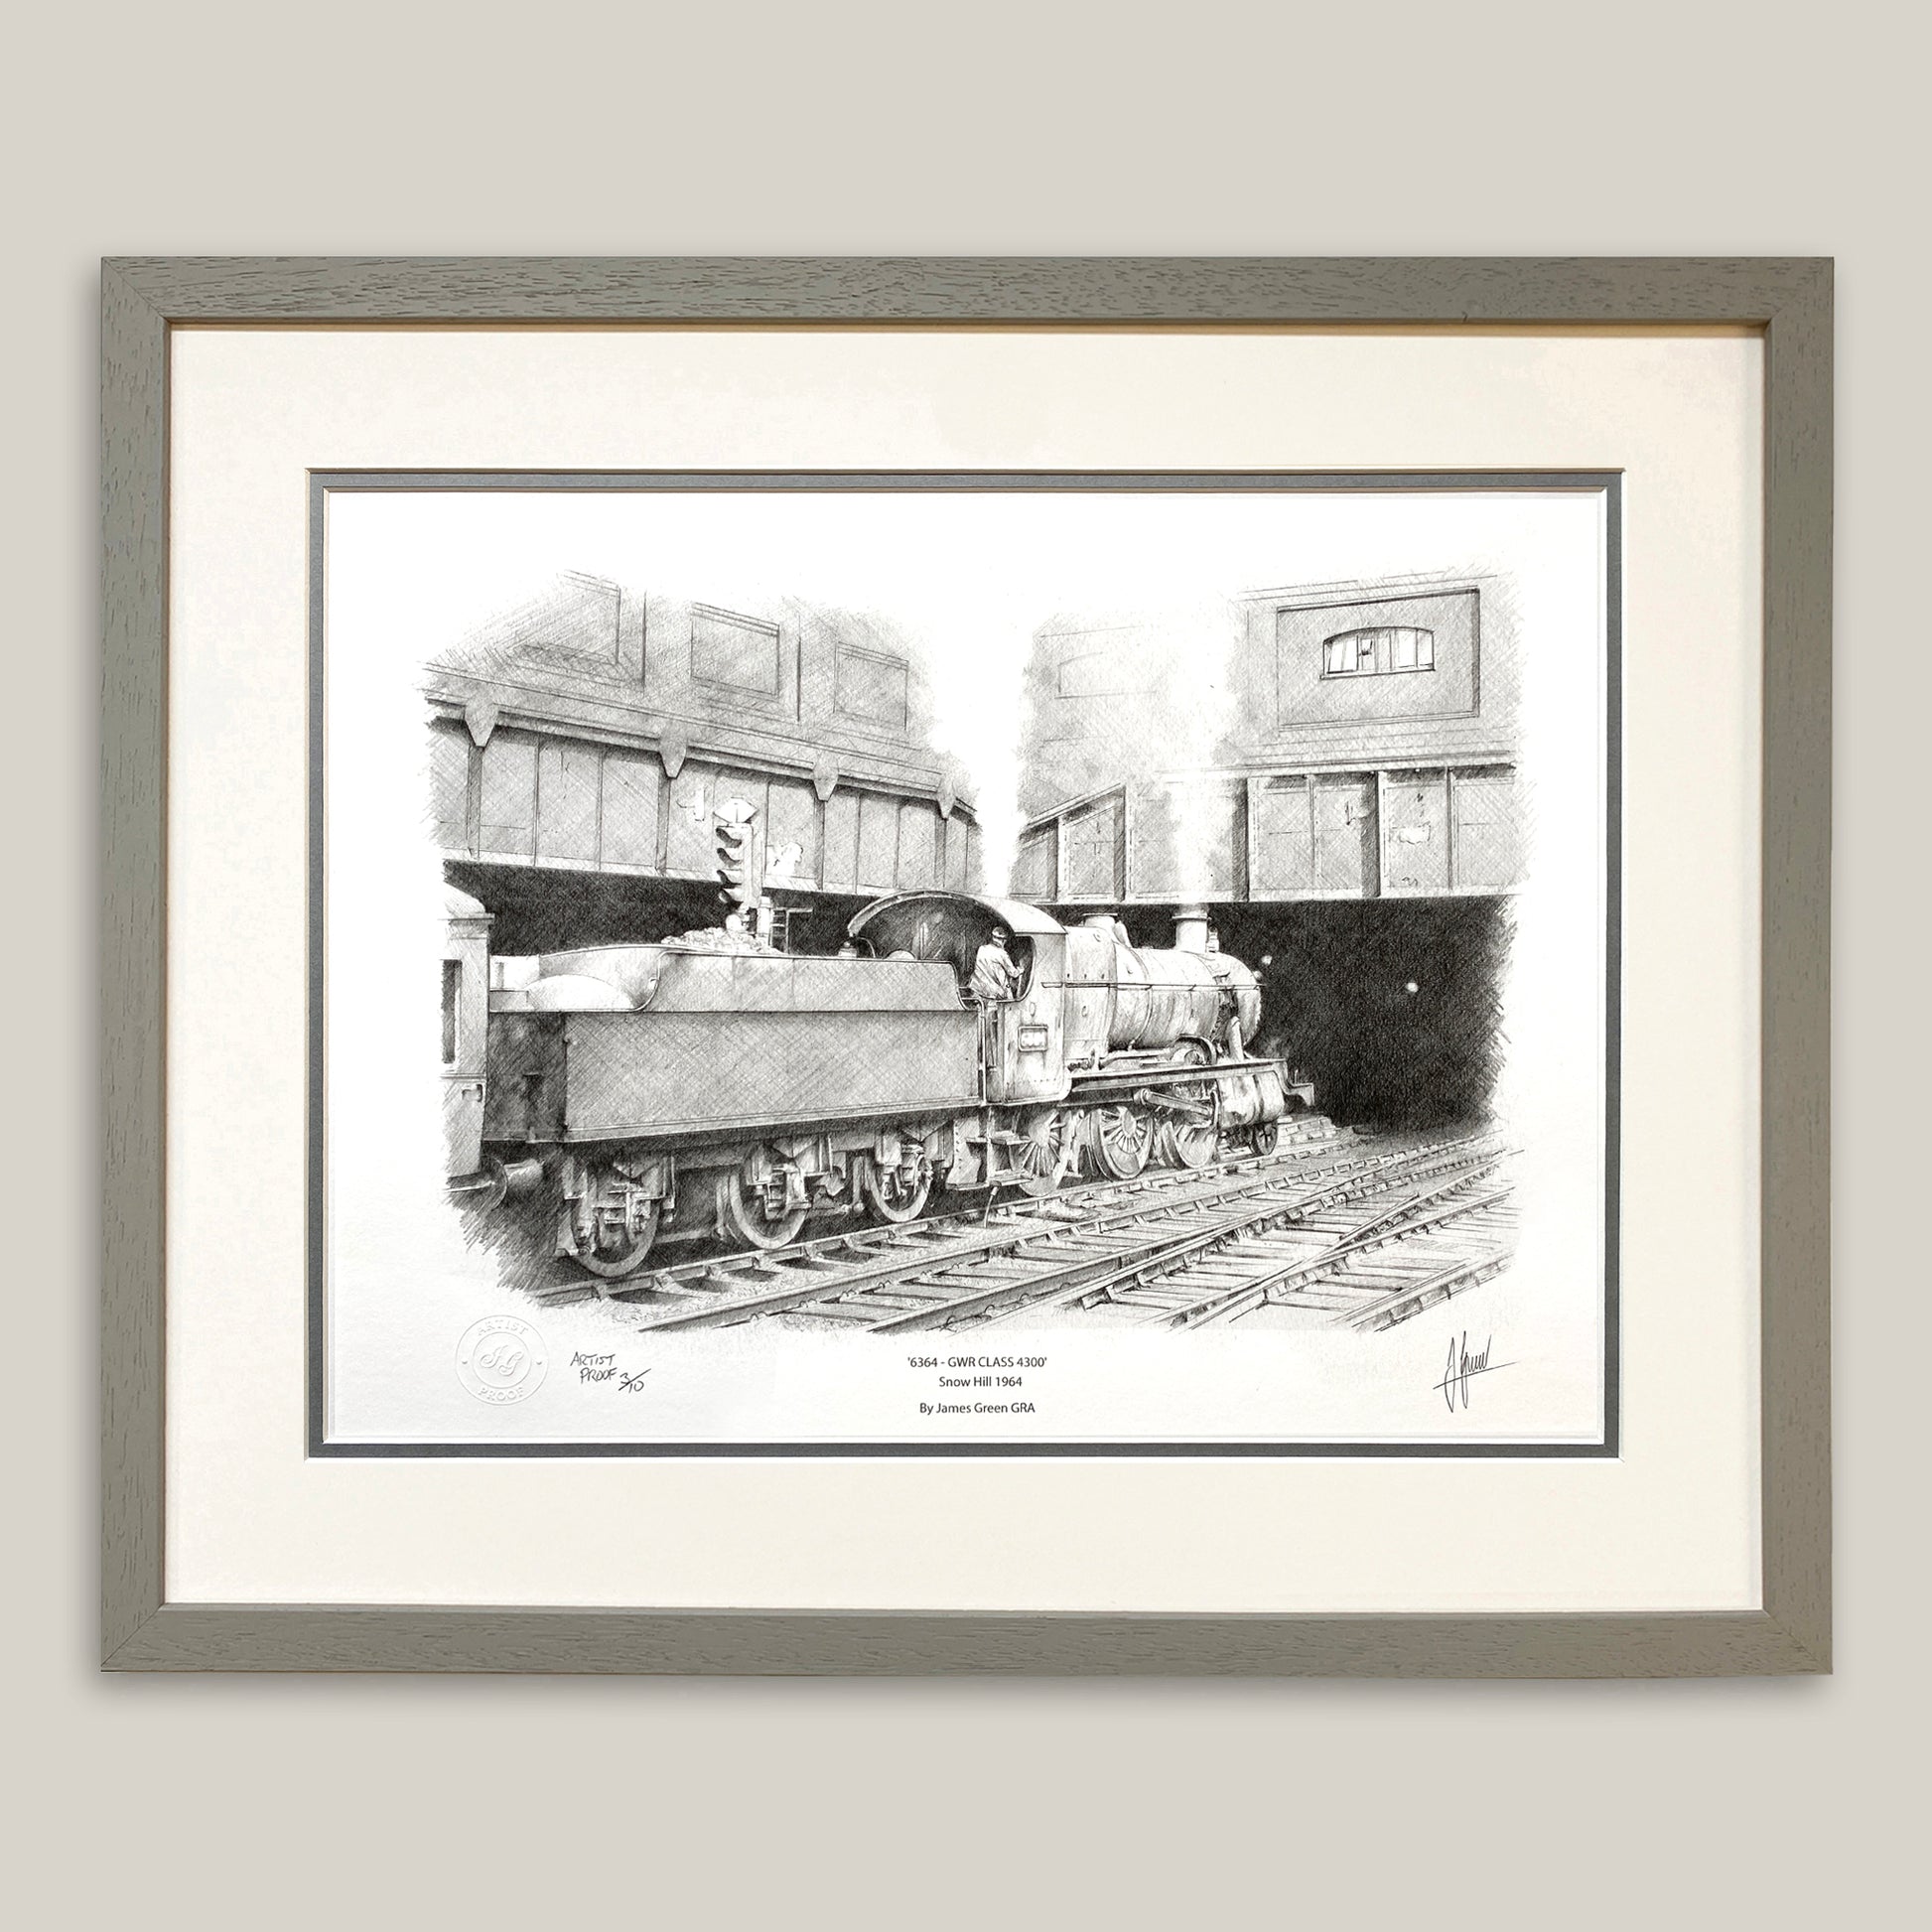 A drawing of a steam train in a grey frame by the artist James Green